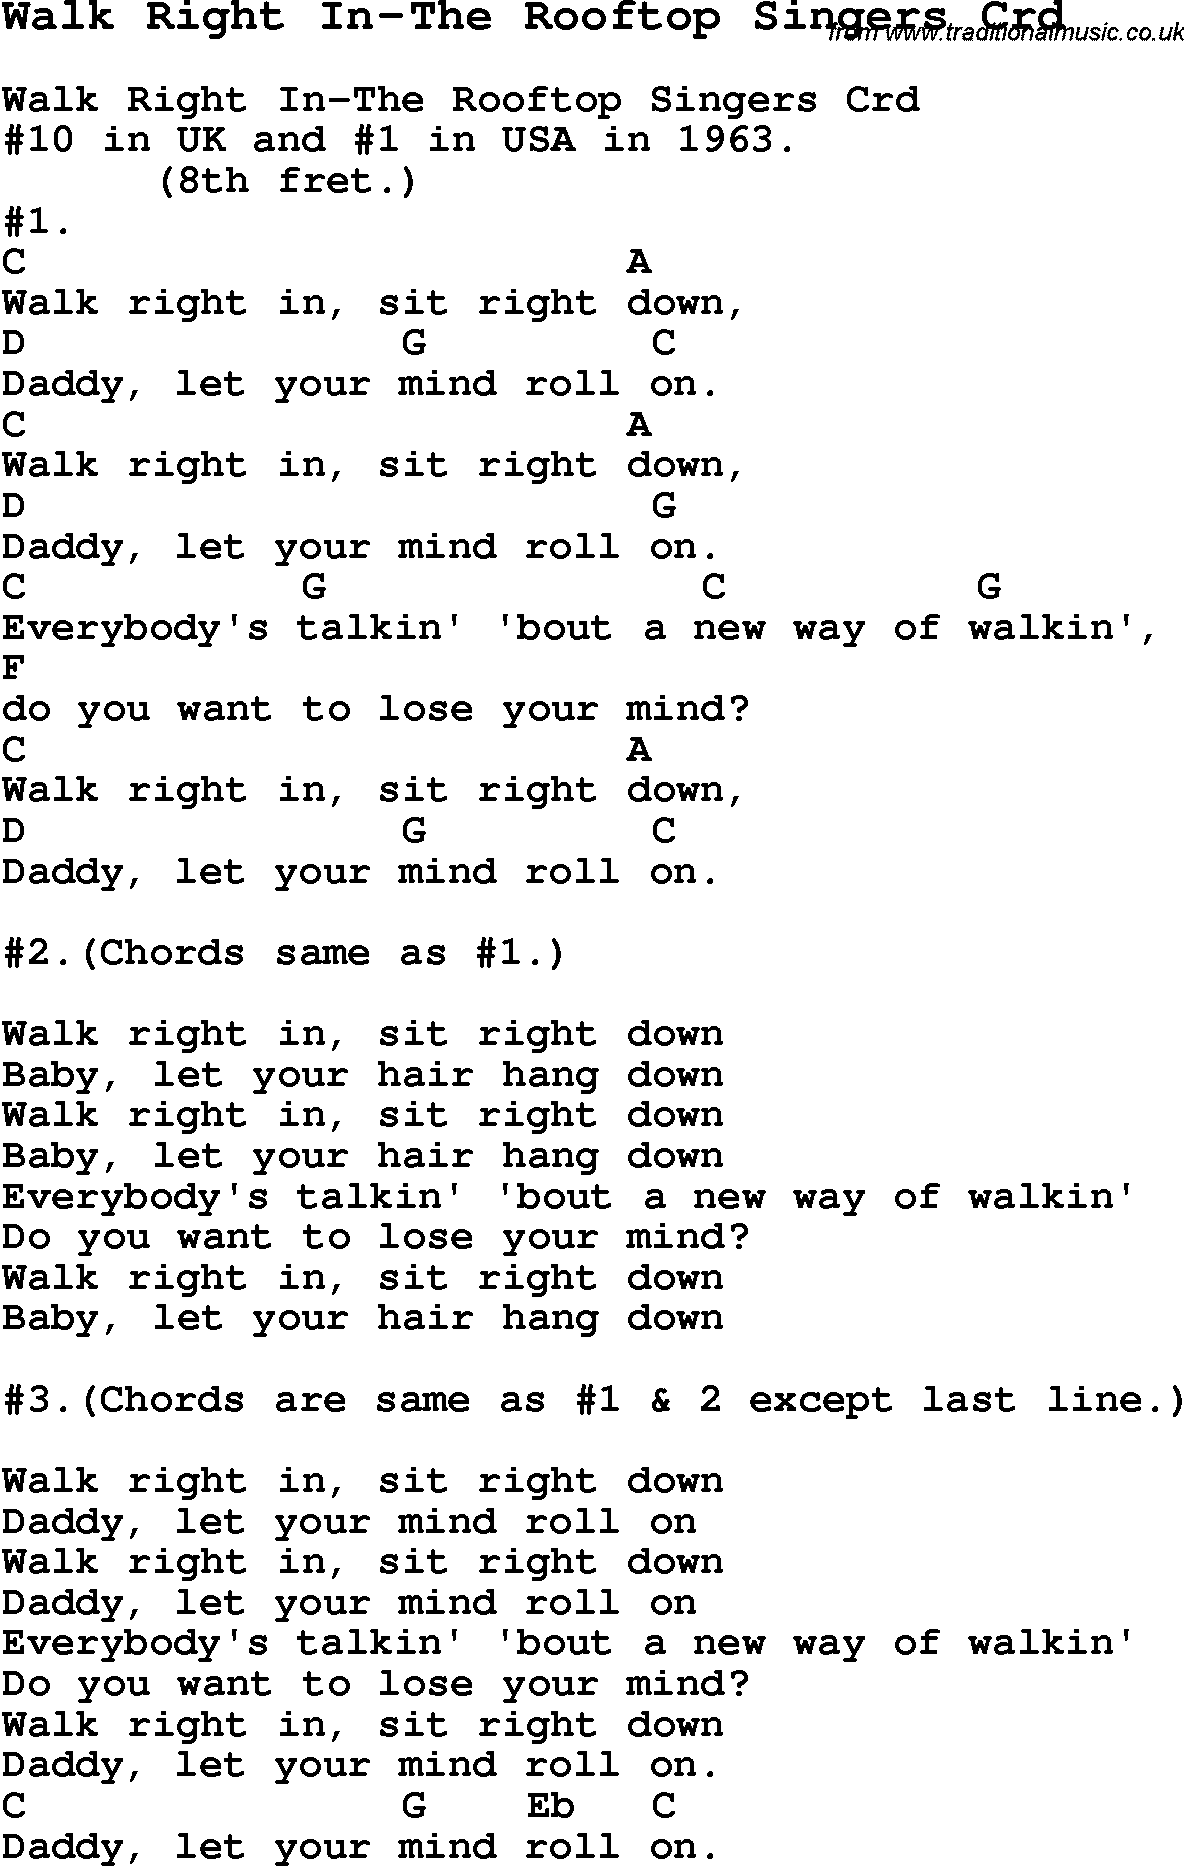 Skiffle Song Lyrics for Walk Right In-The Rooftop Singers with chords for Mandolin, Ukulele, Guitar, Banjo etc.